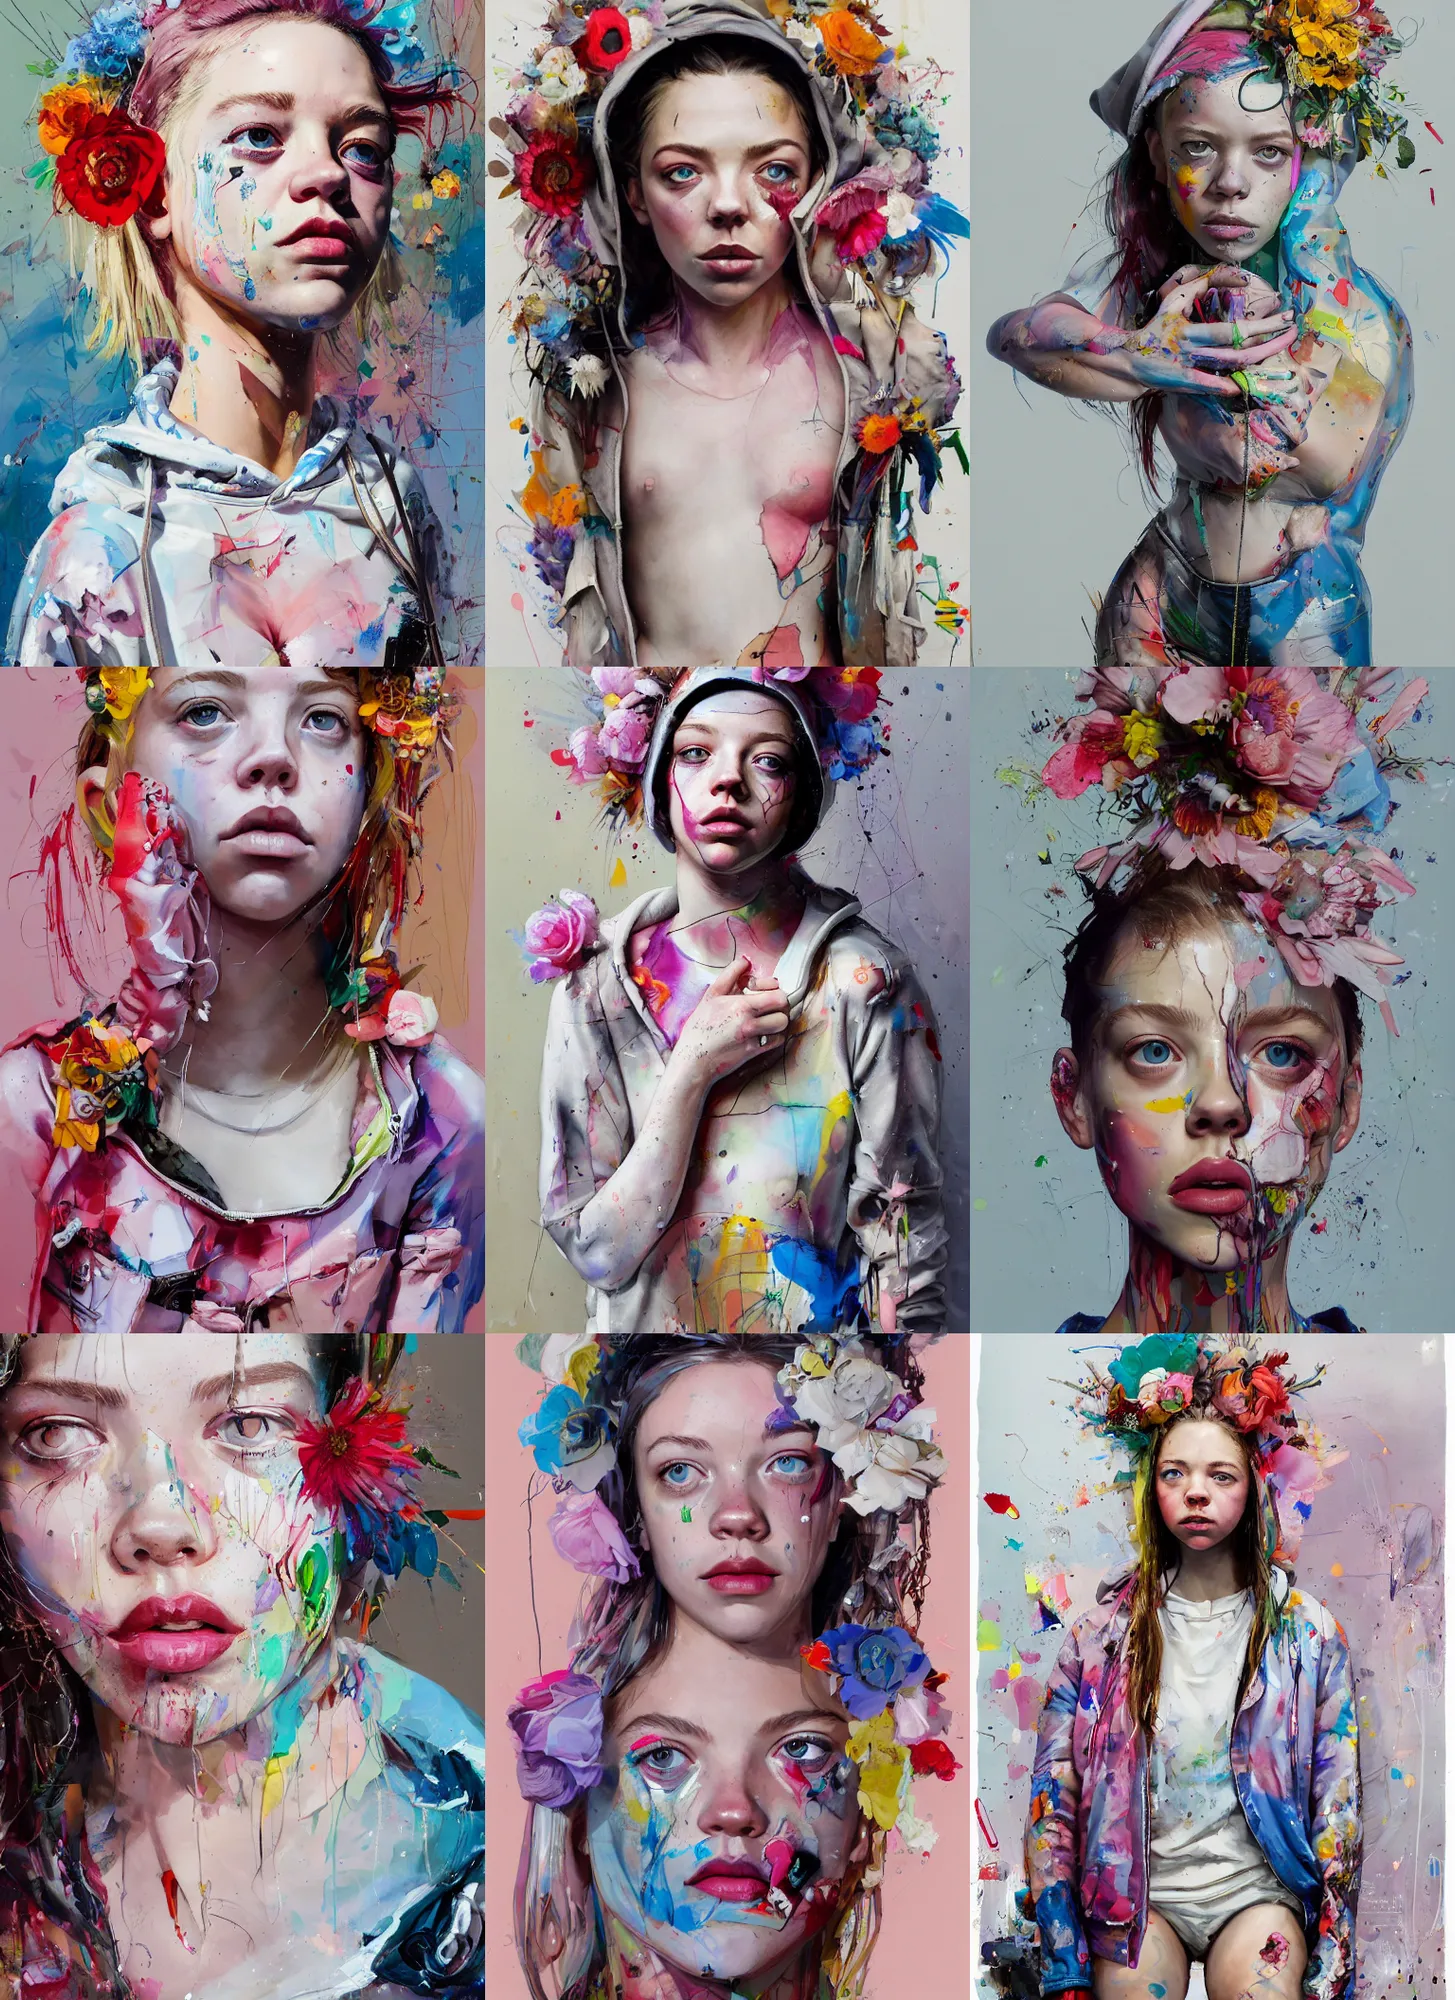 Prompt: 2 5 year old sydney sweeney in the style of martine johanna and! jenny saville!, wearing a hoodie, standing in a township street, street fashion outfit, haute couture fashion shoot, full figure painting by john berkey, david choe, ismail inceoglu, decorative flowers, 2 4 mm, die antwoord ( yoladi visser )